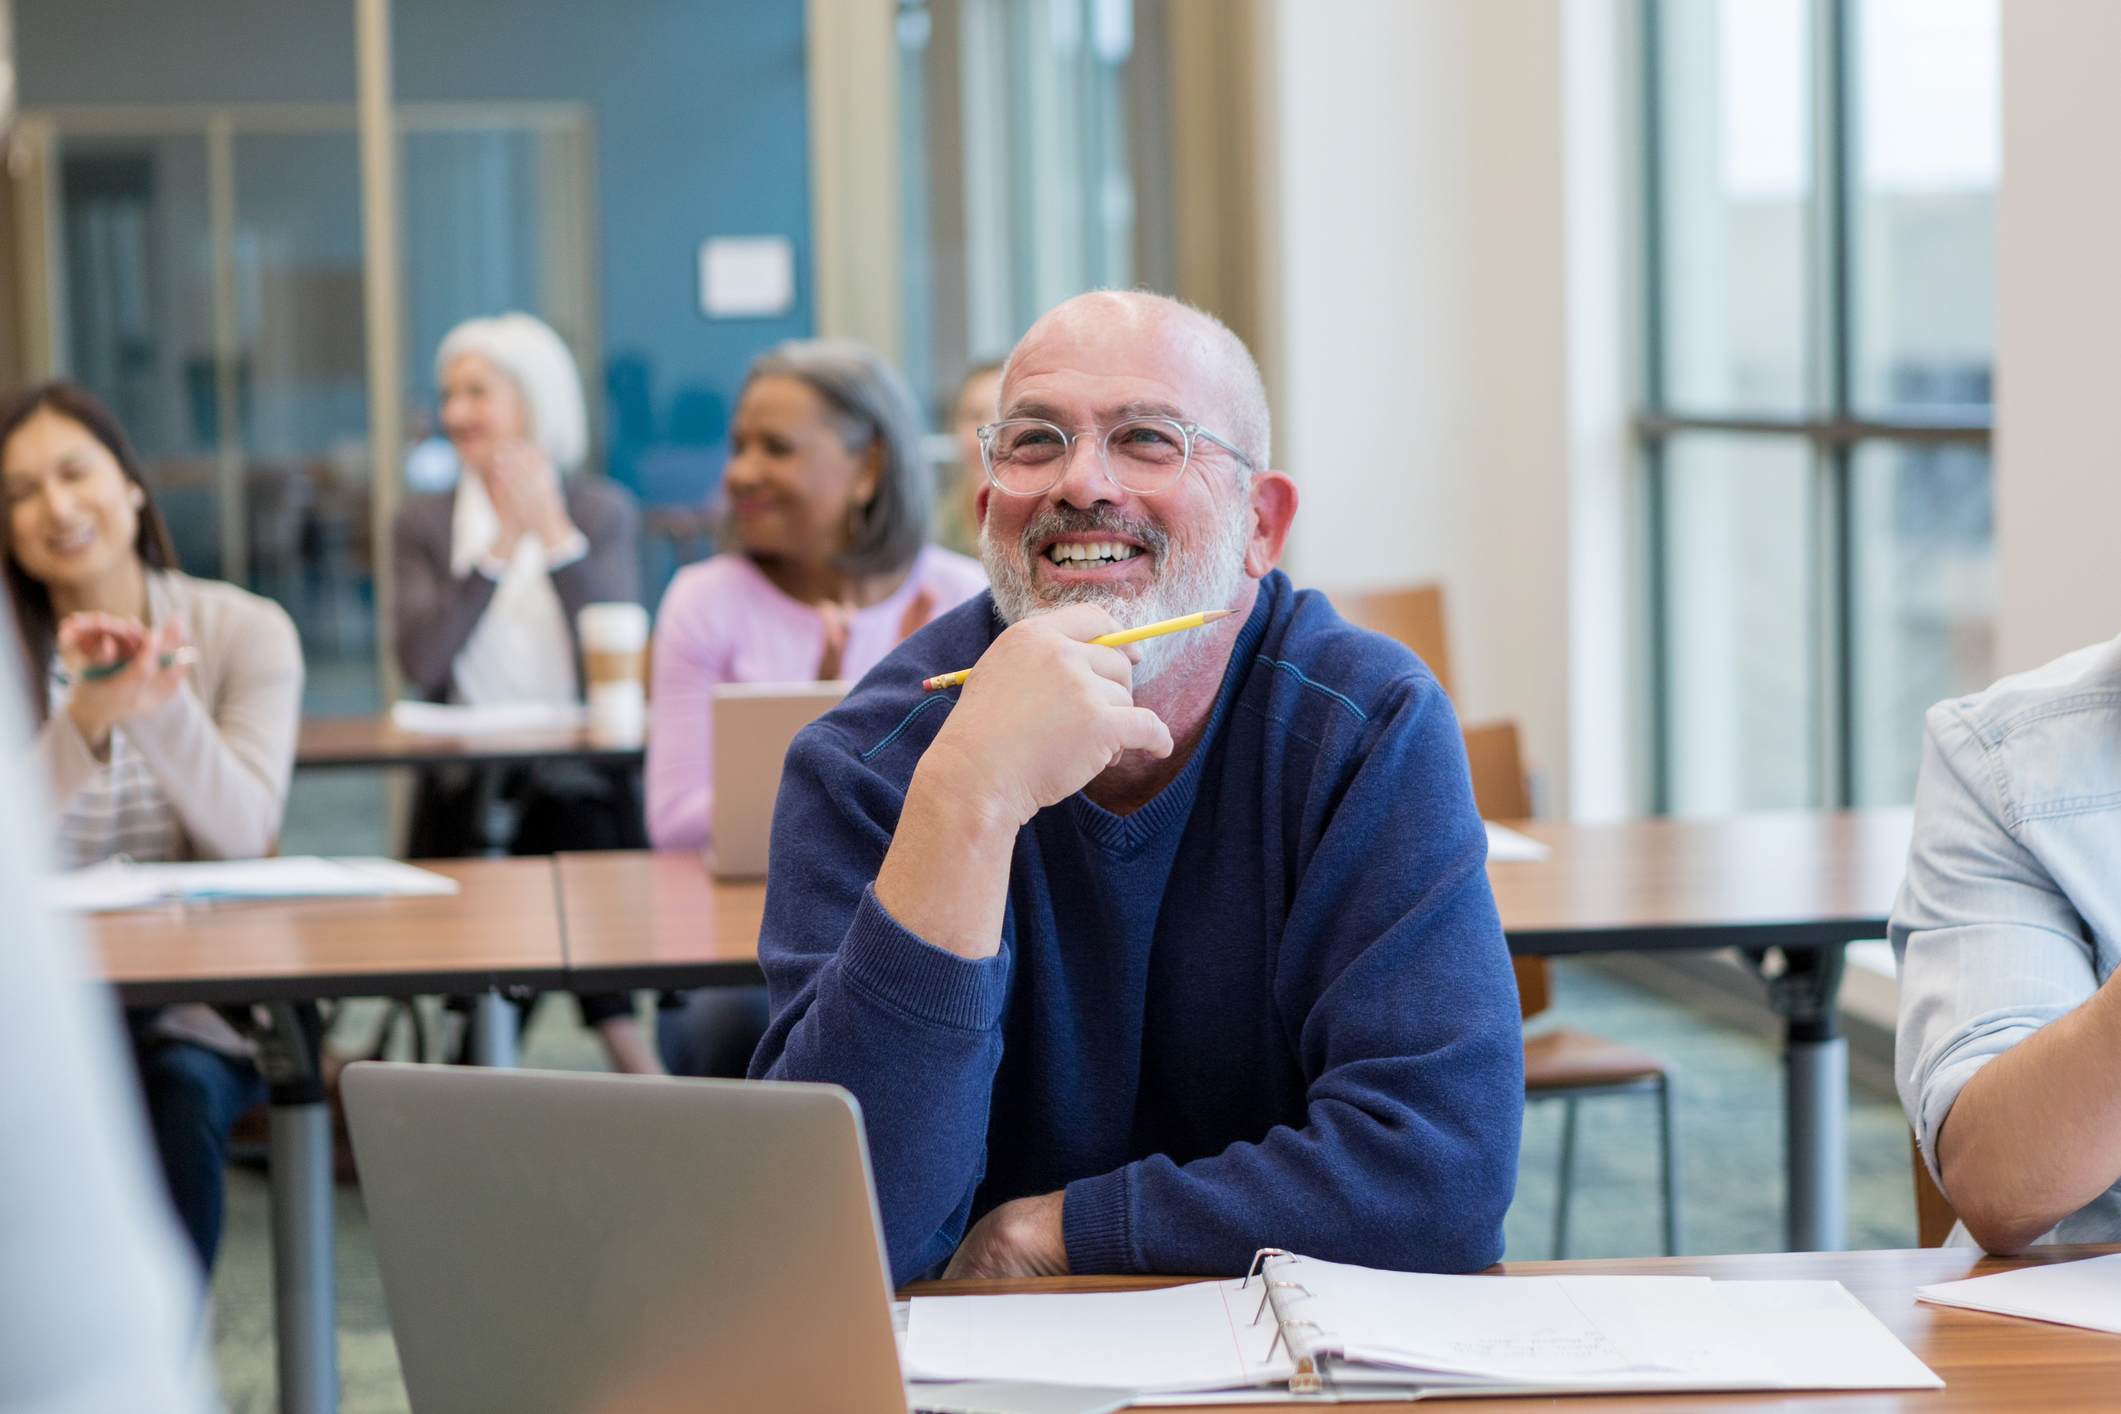 Smiling man taking part in an adult learning class